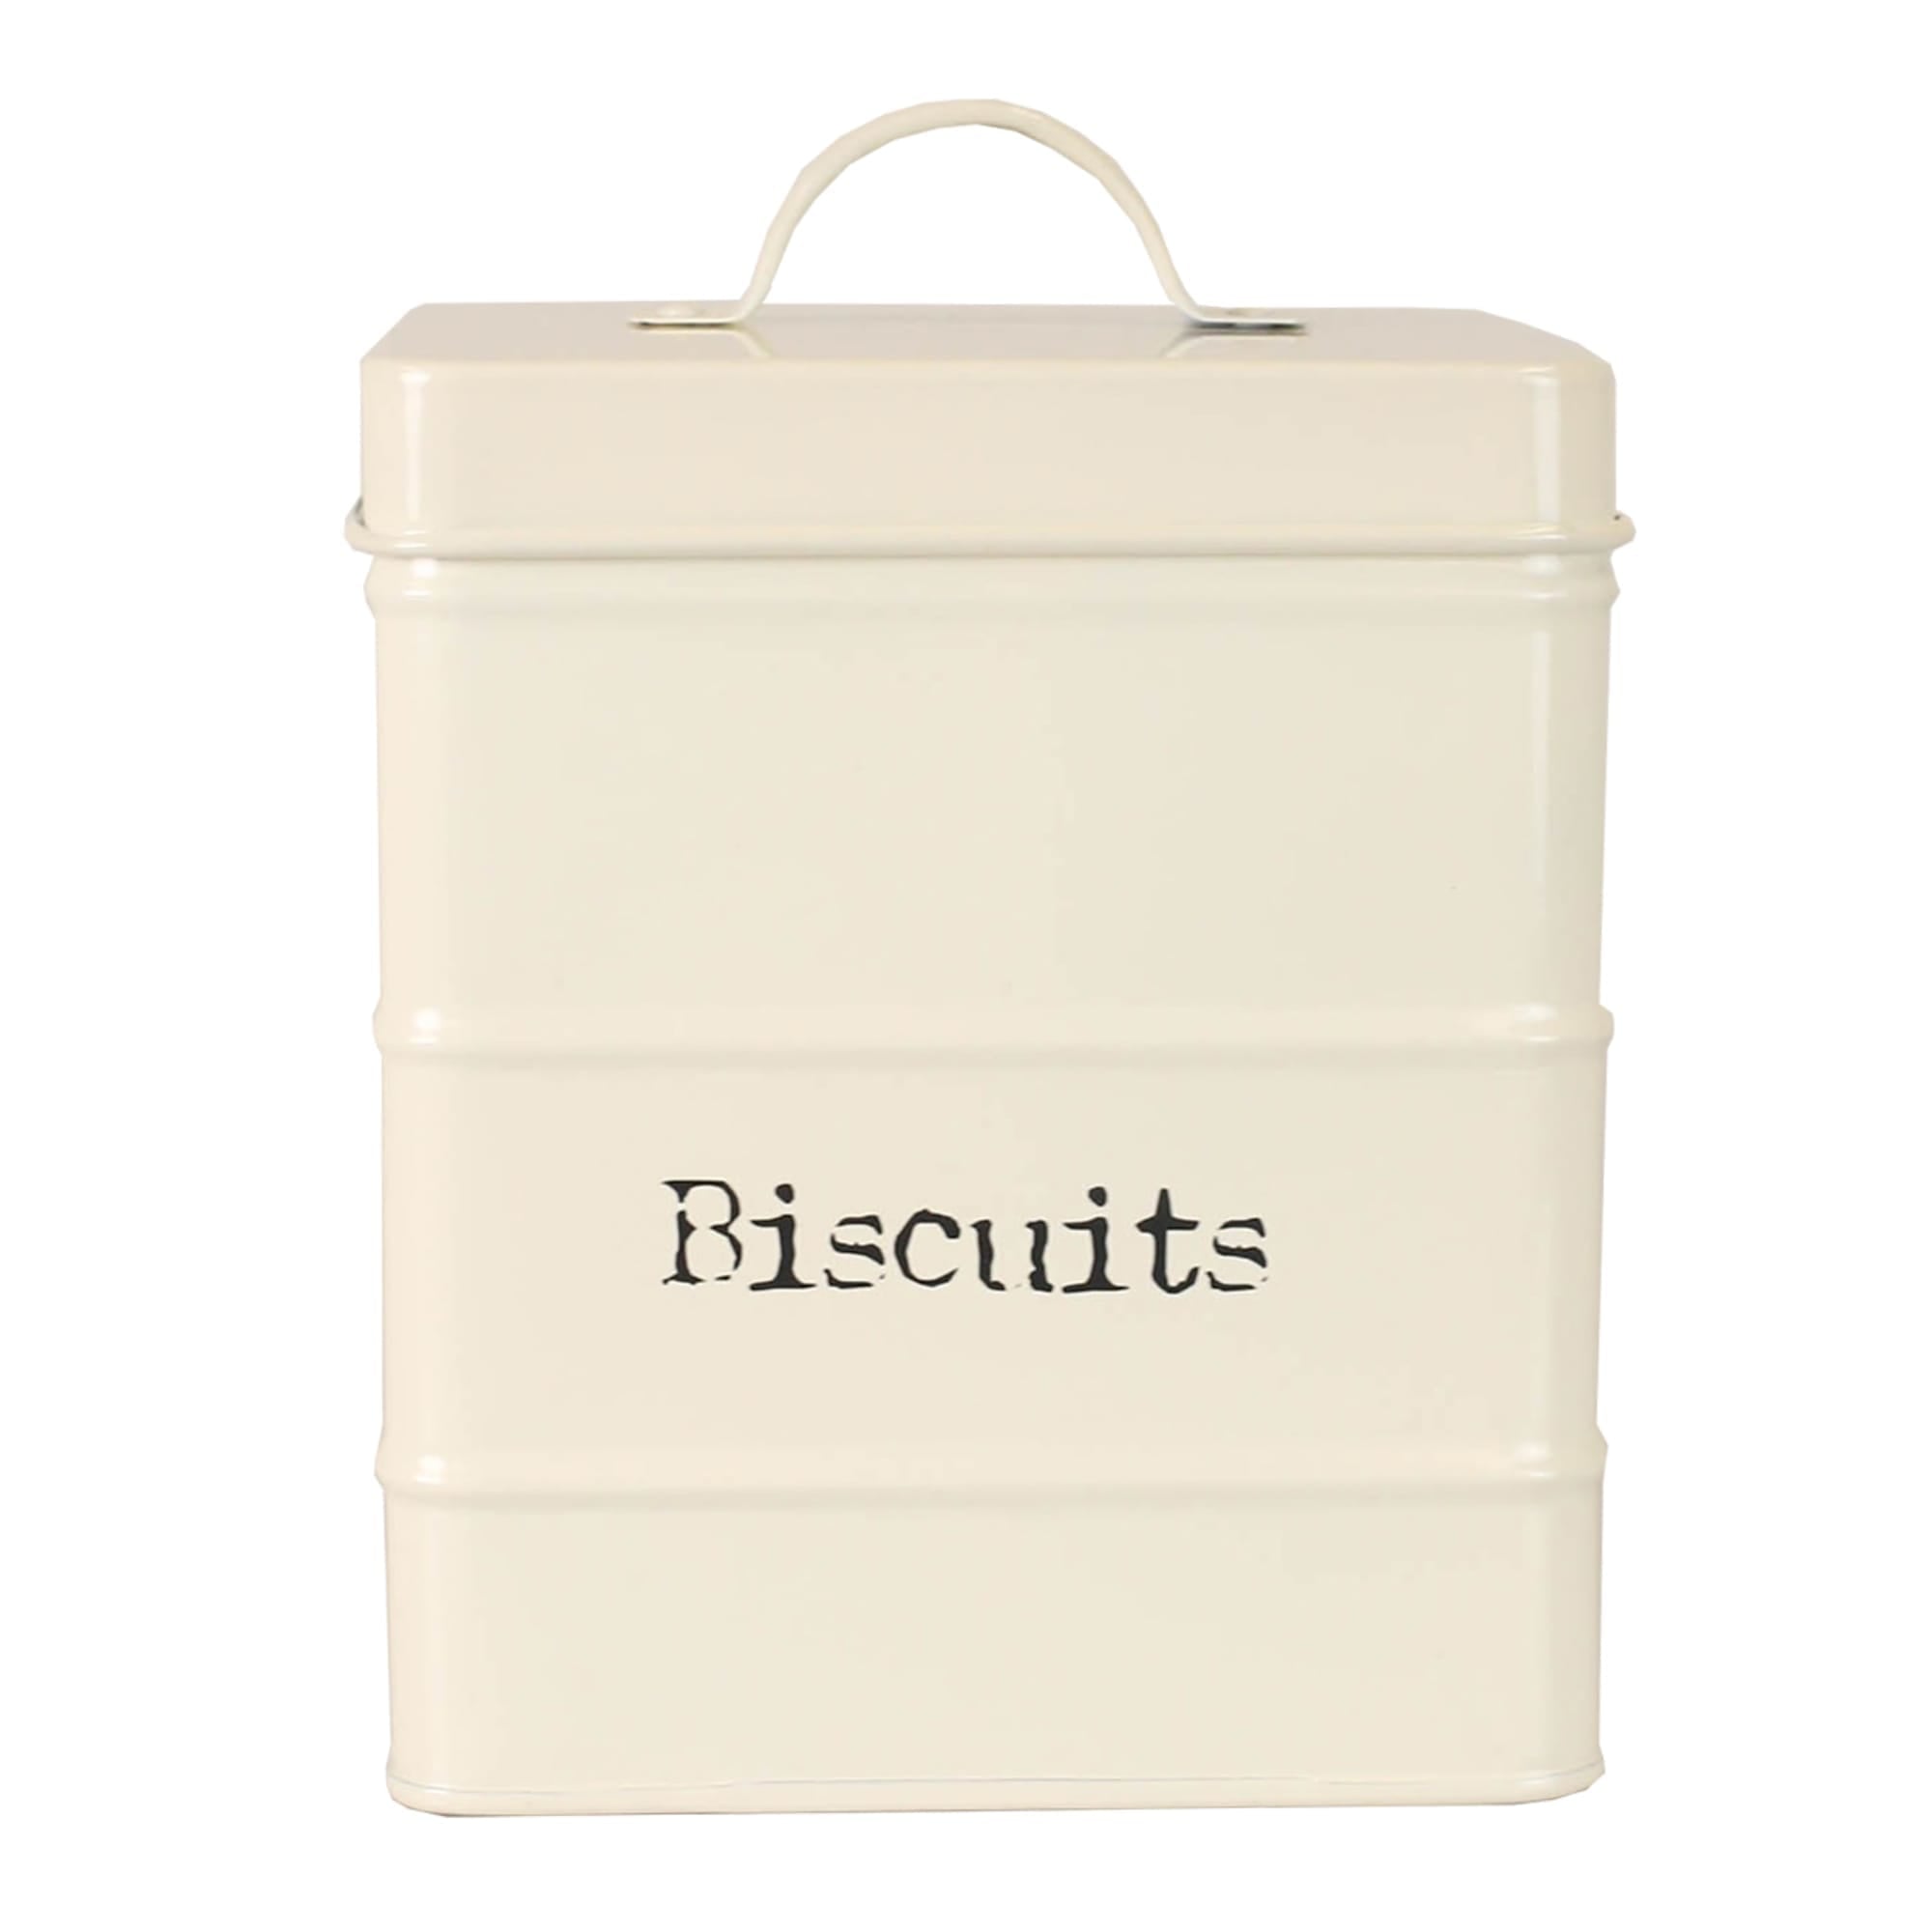 Home Basics Biscuits 2.8 LT Large Vintage Retro Enamel High Strength Tin Square Canister with Tight-Fit Lid and Easy Lift Handle, Ivory $6.00 EACH, CASE PACK OF 8